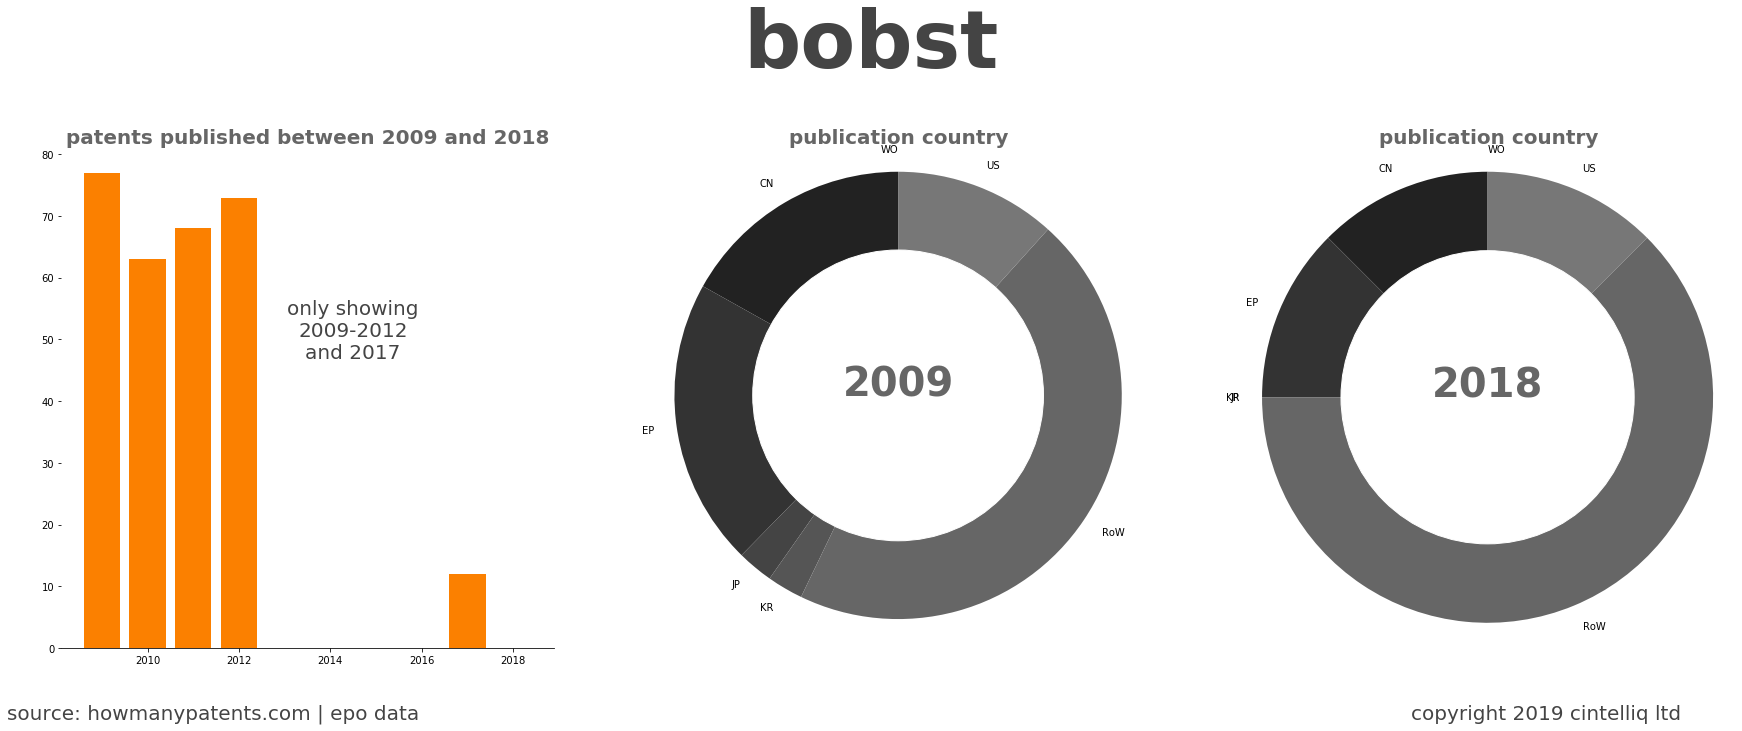 summary of patents for Bobst